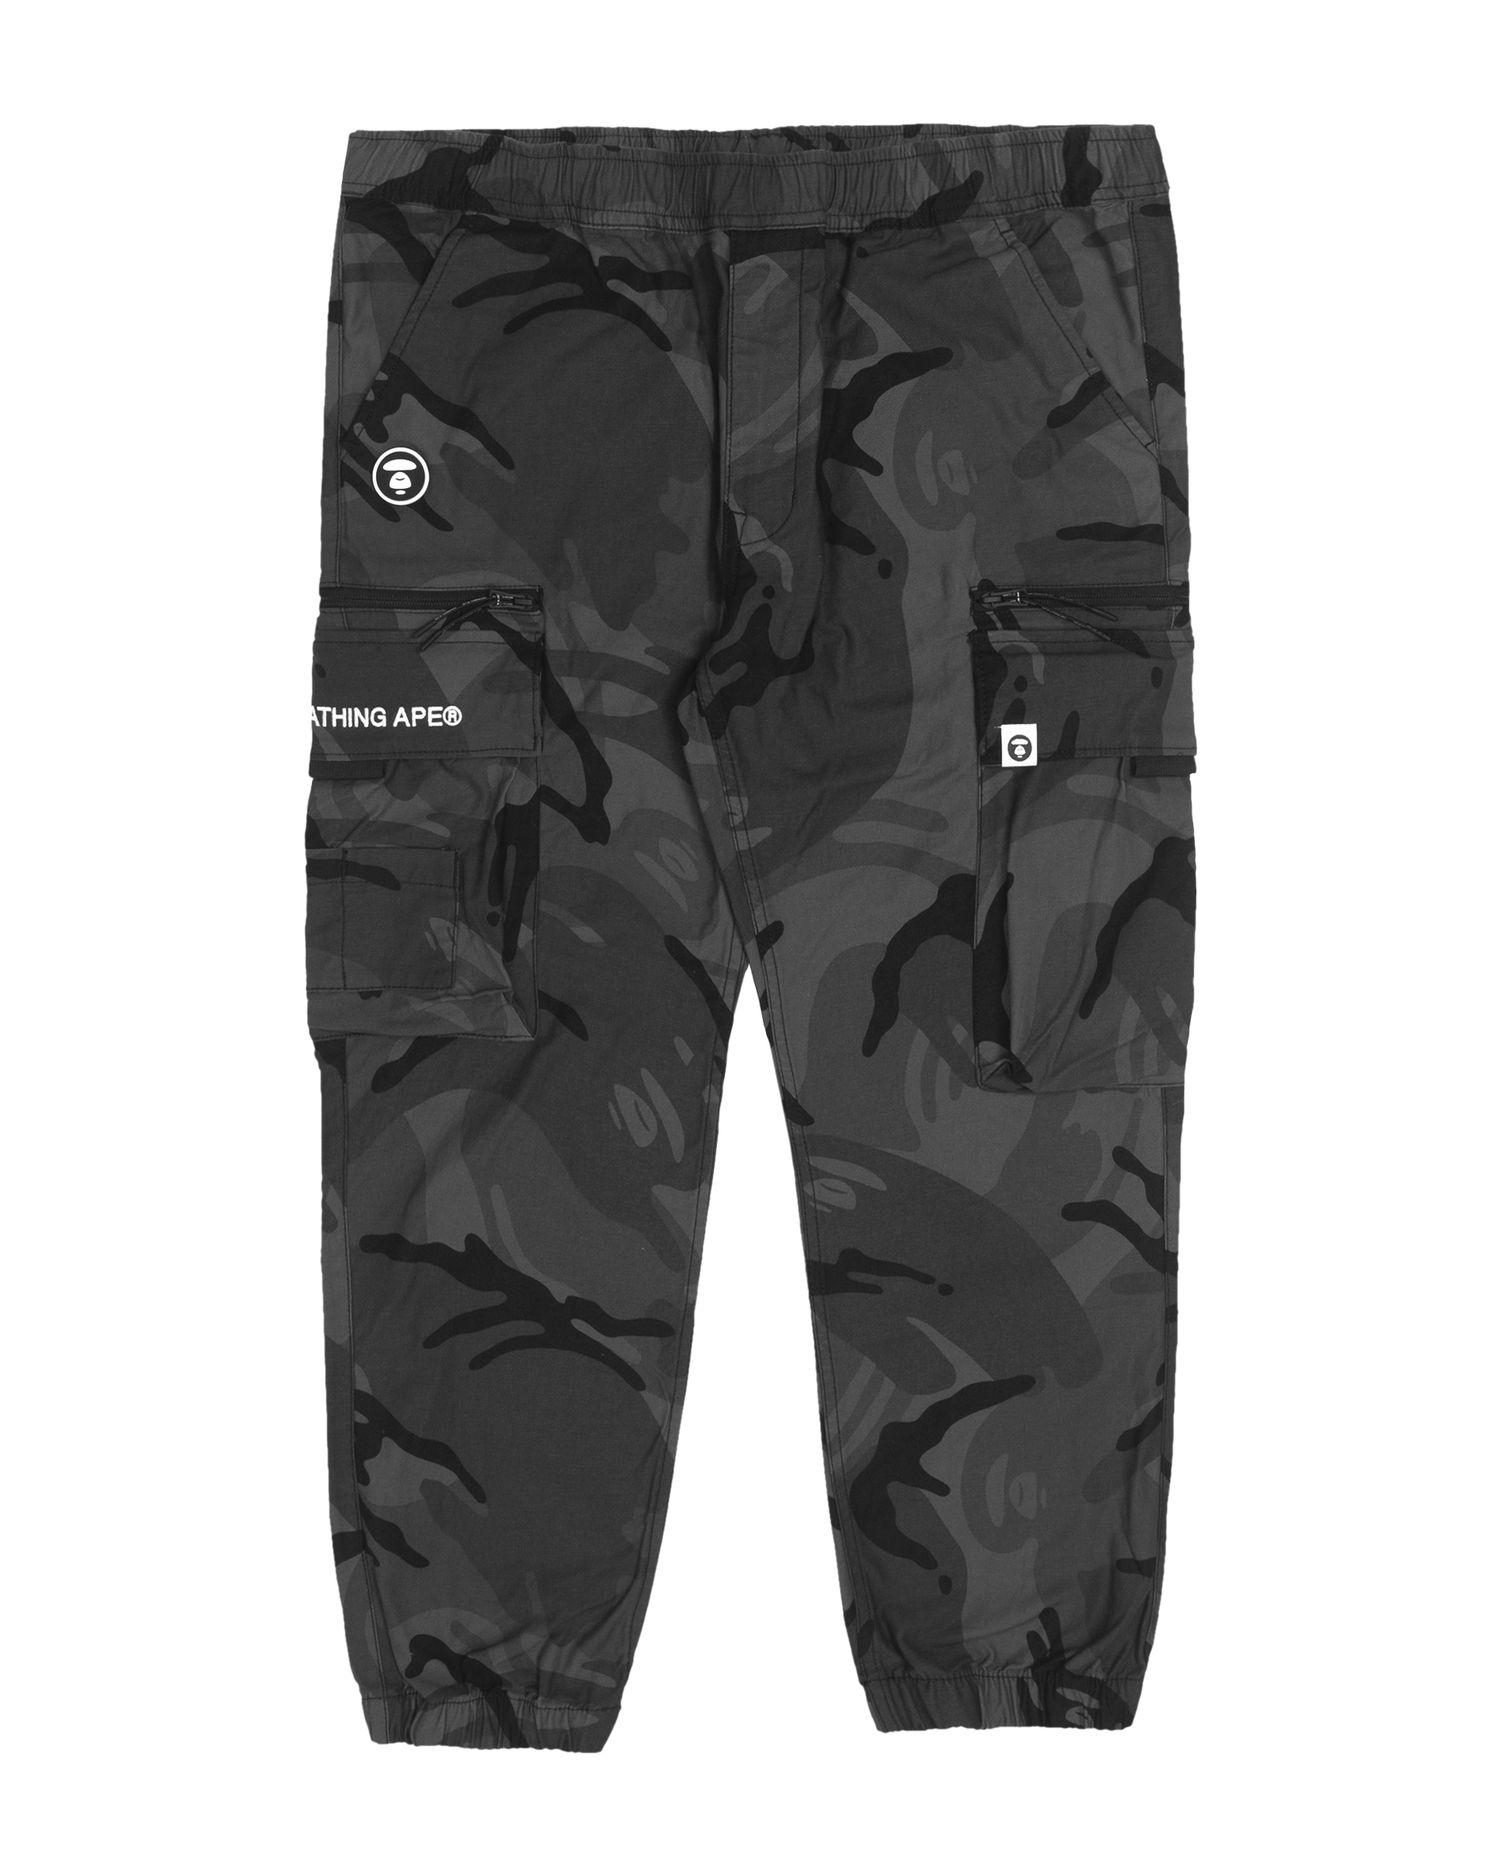 Moonface camo cargo track pants by AAPE